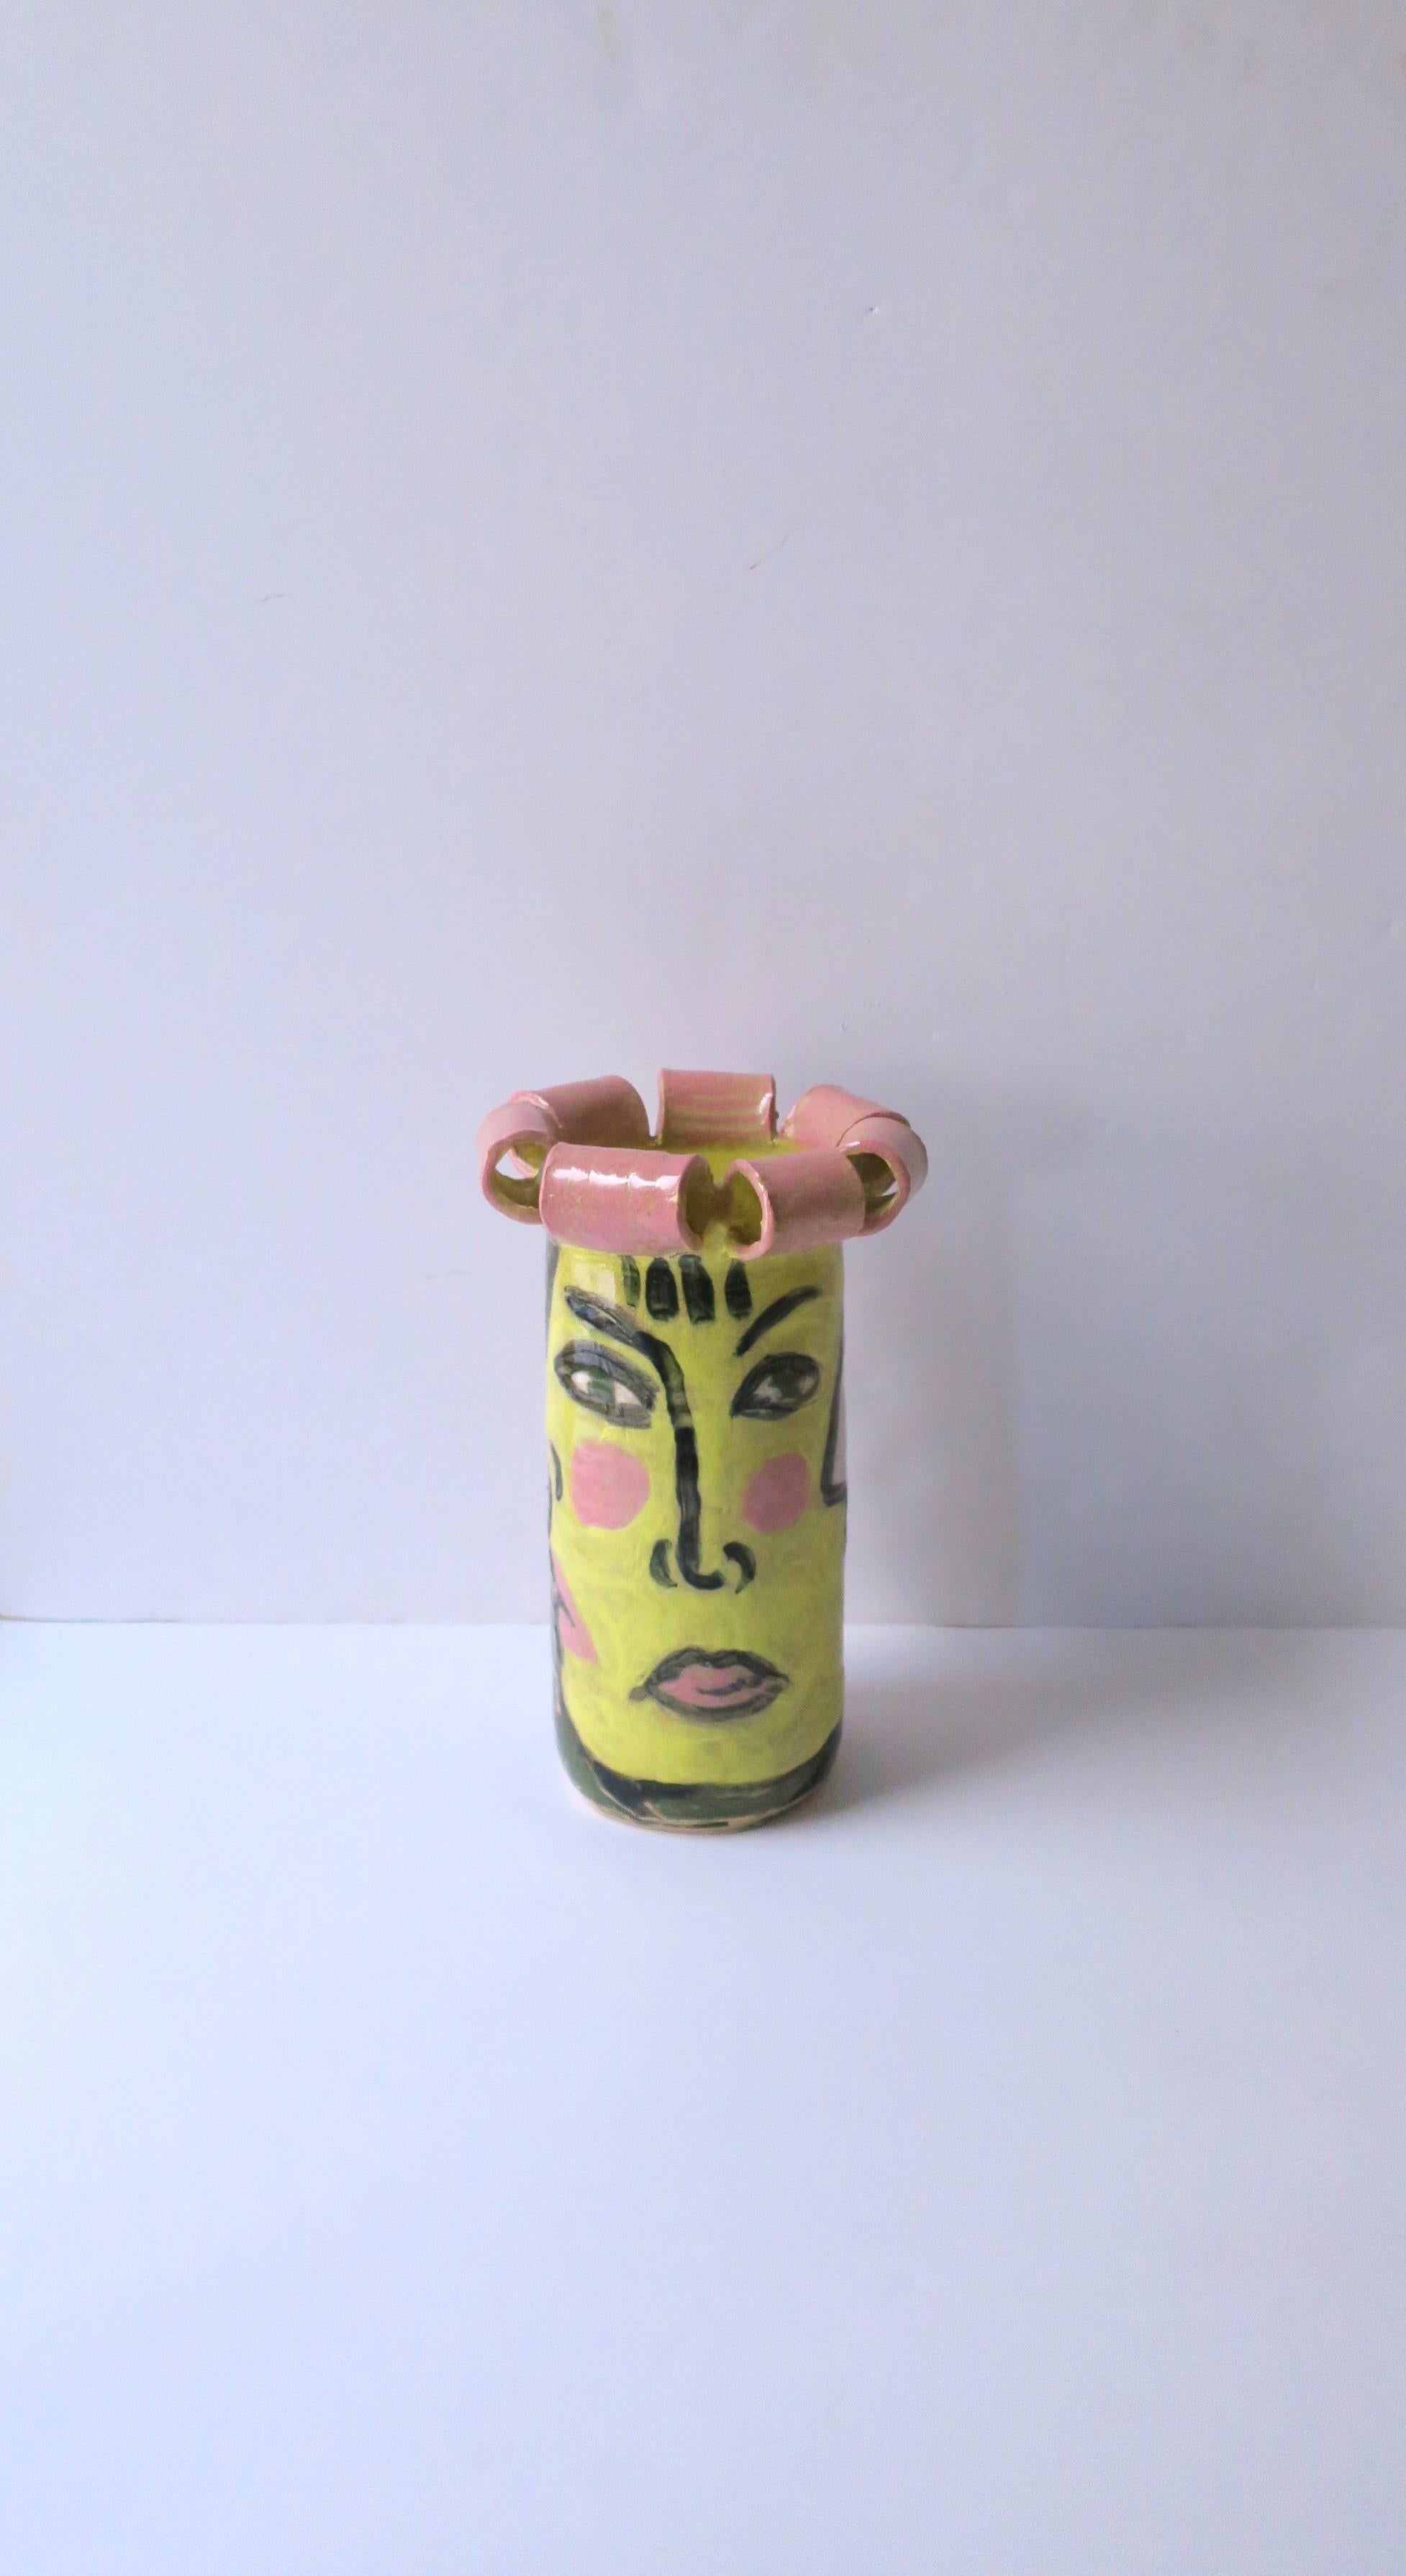 Glazed Cubist Face Studio Pottery Sculpture Vase in the Style of Picasso, 1989 For Sale